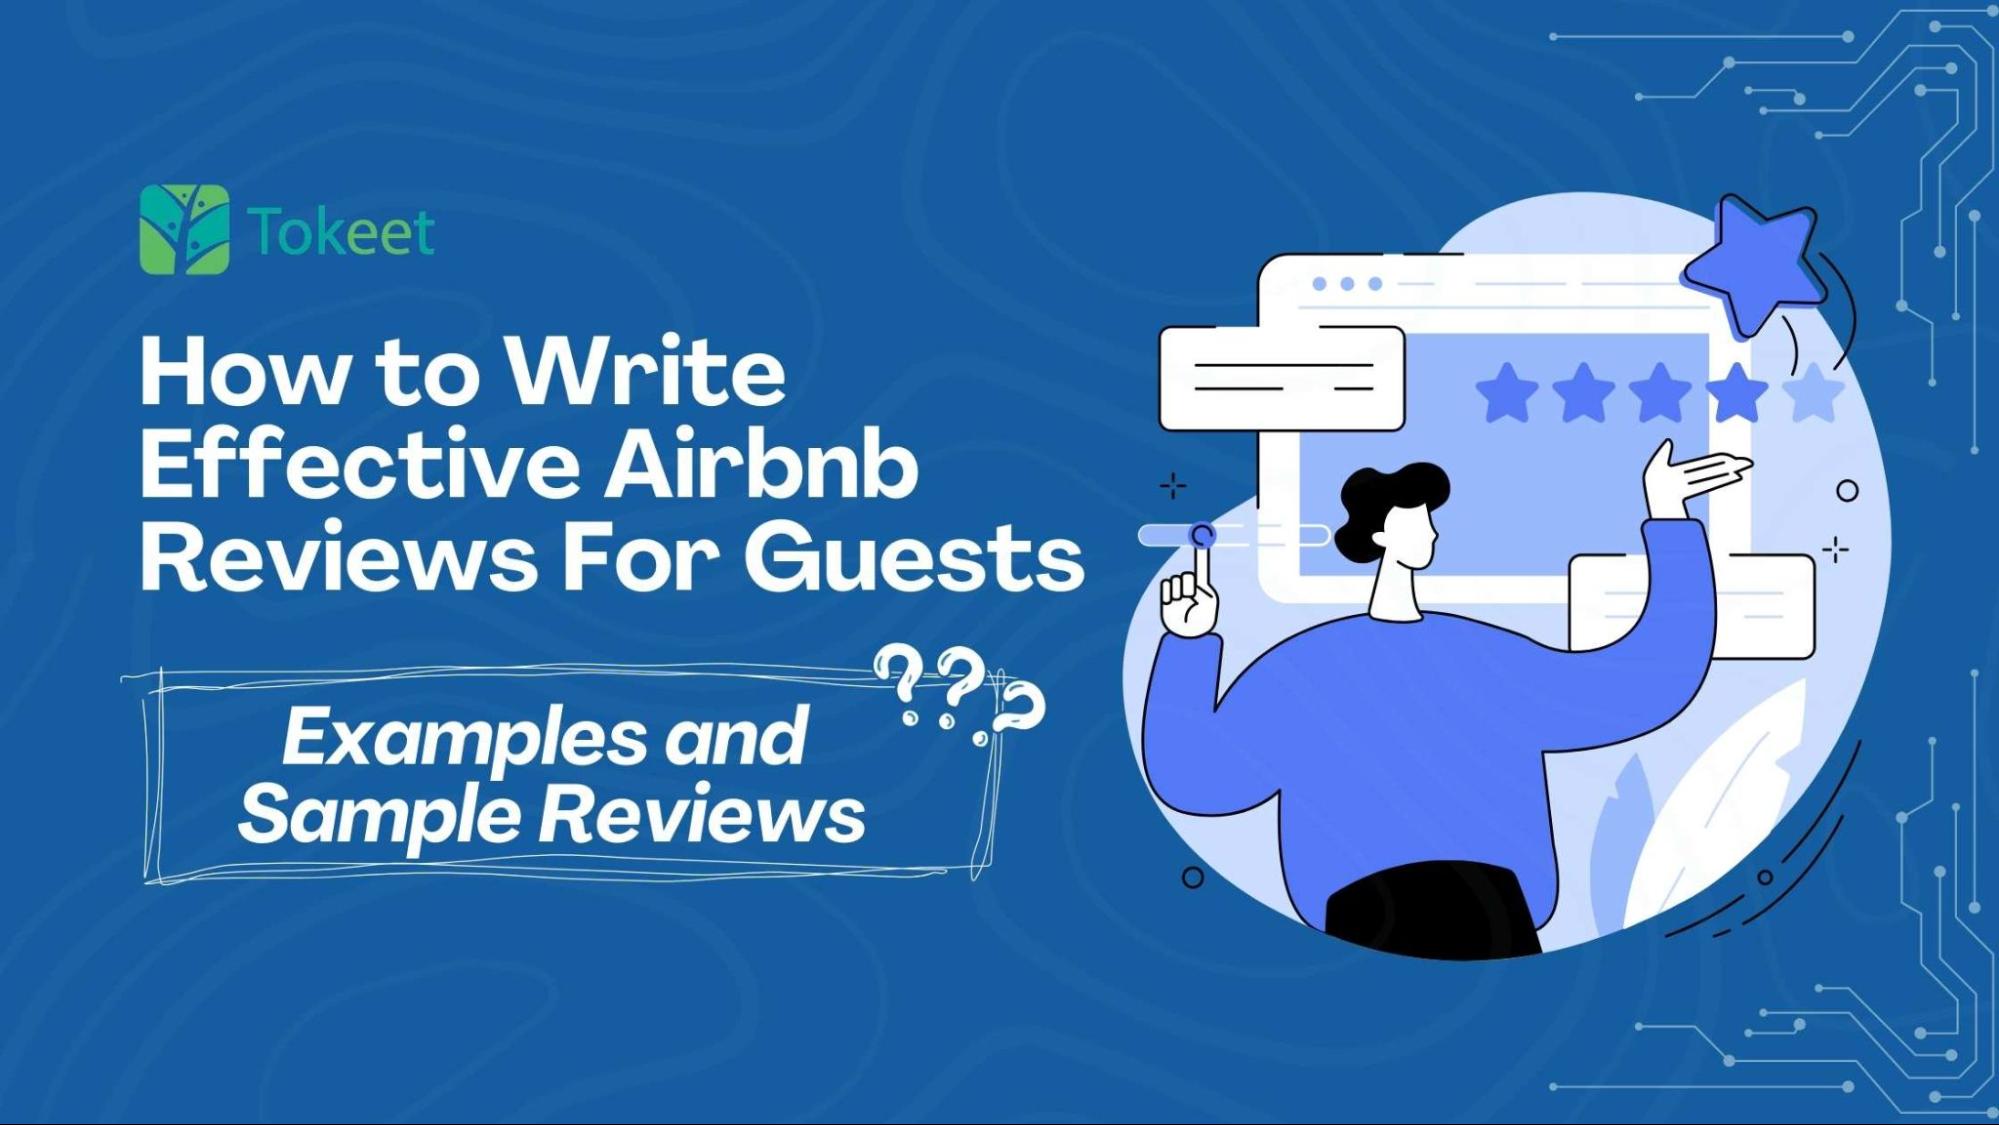 How to Write Effective Airbnb Reviews for Guests: Examples and Sample Reviews